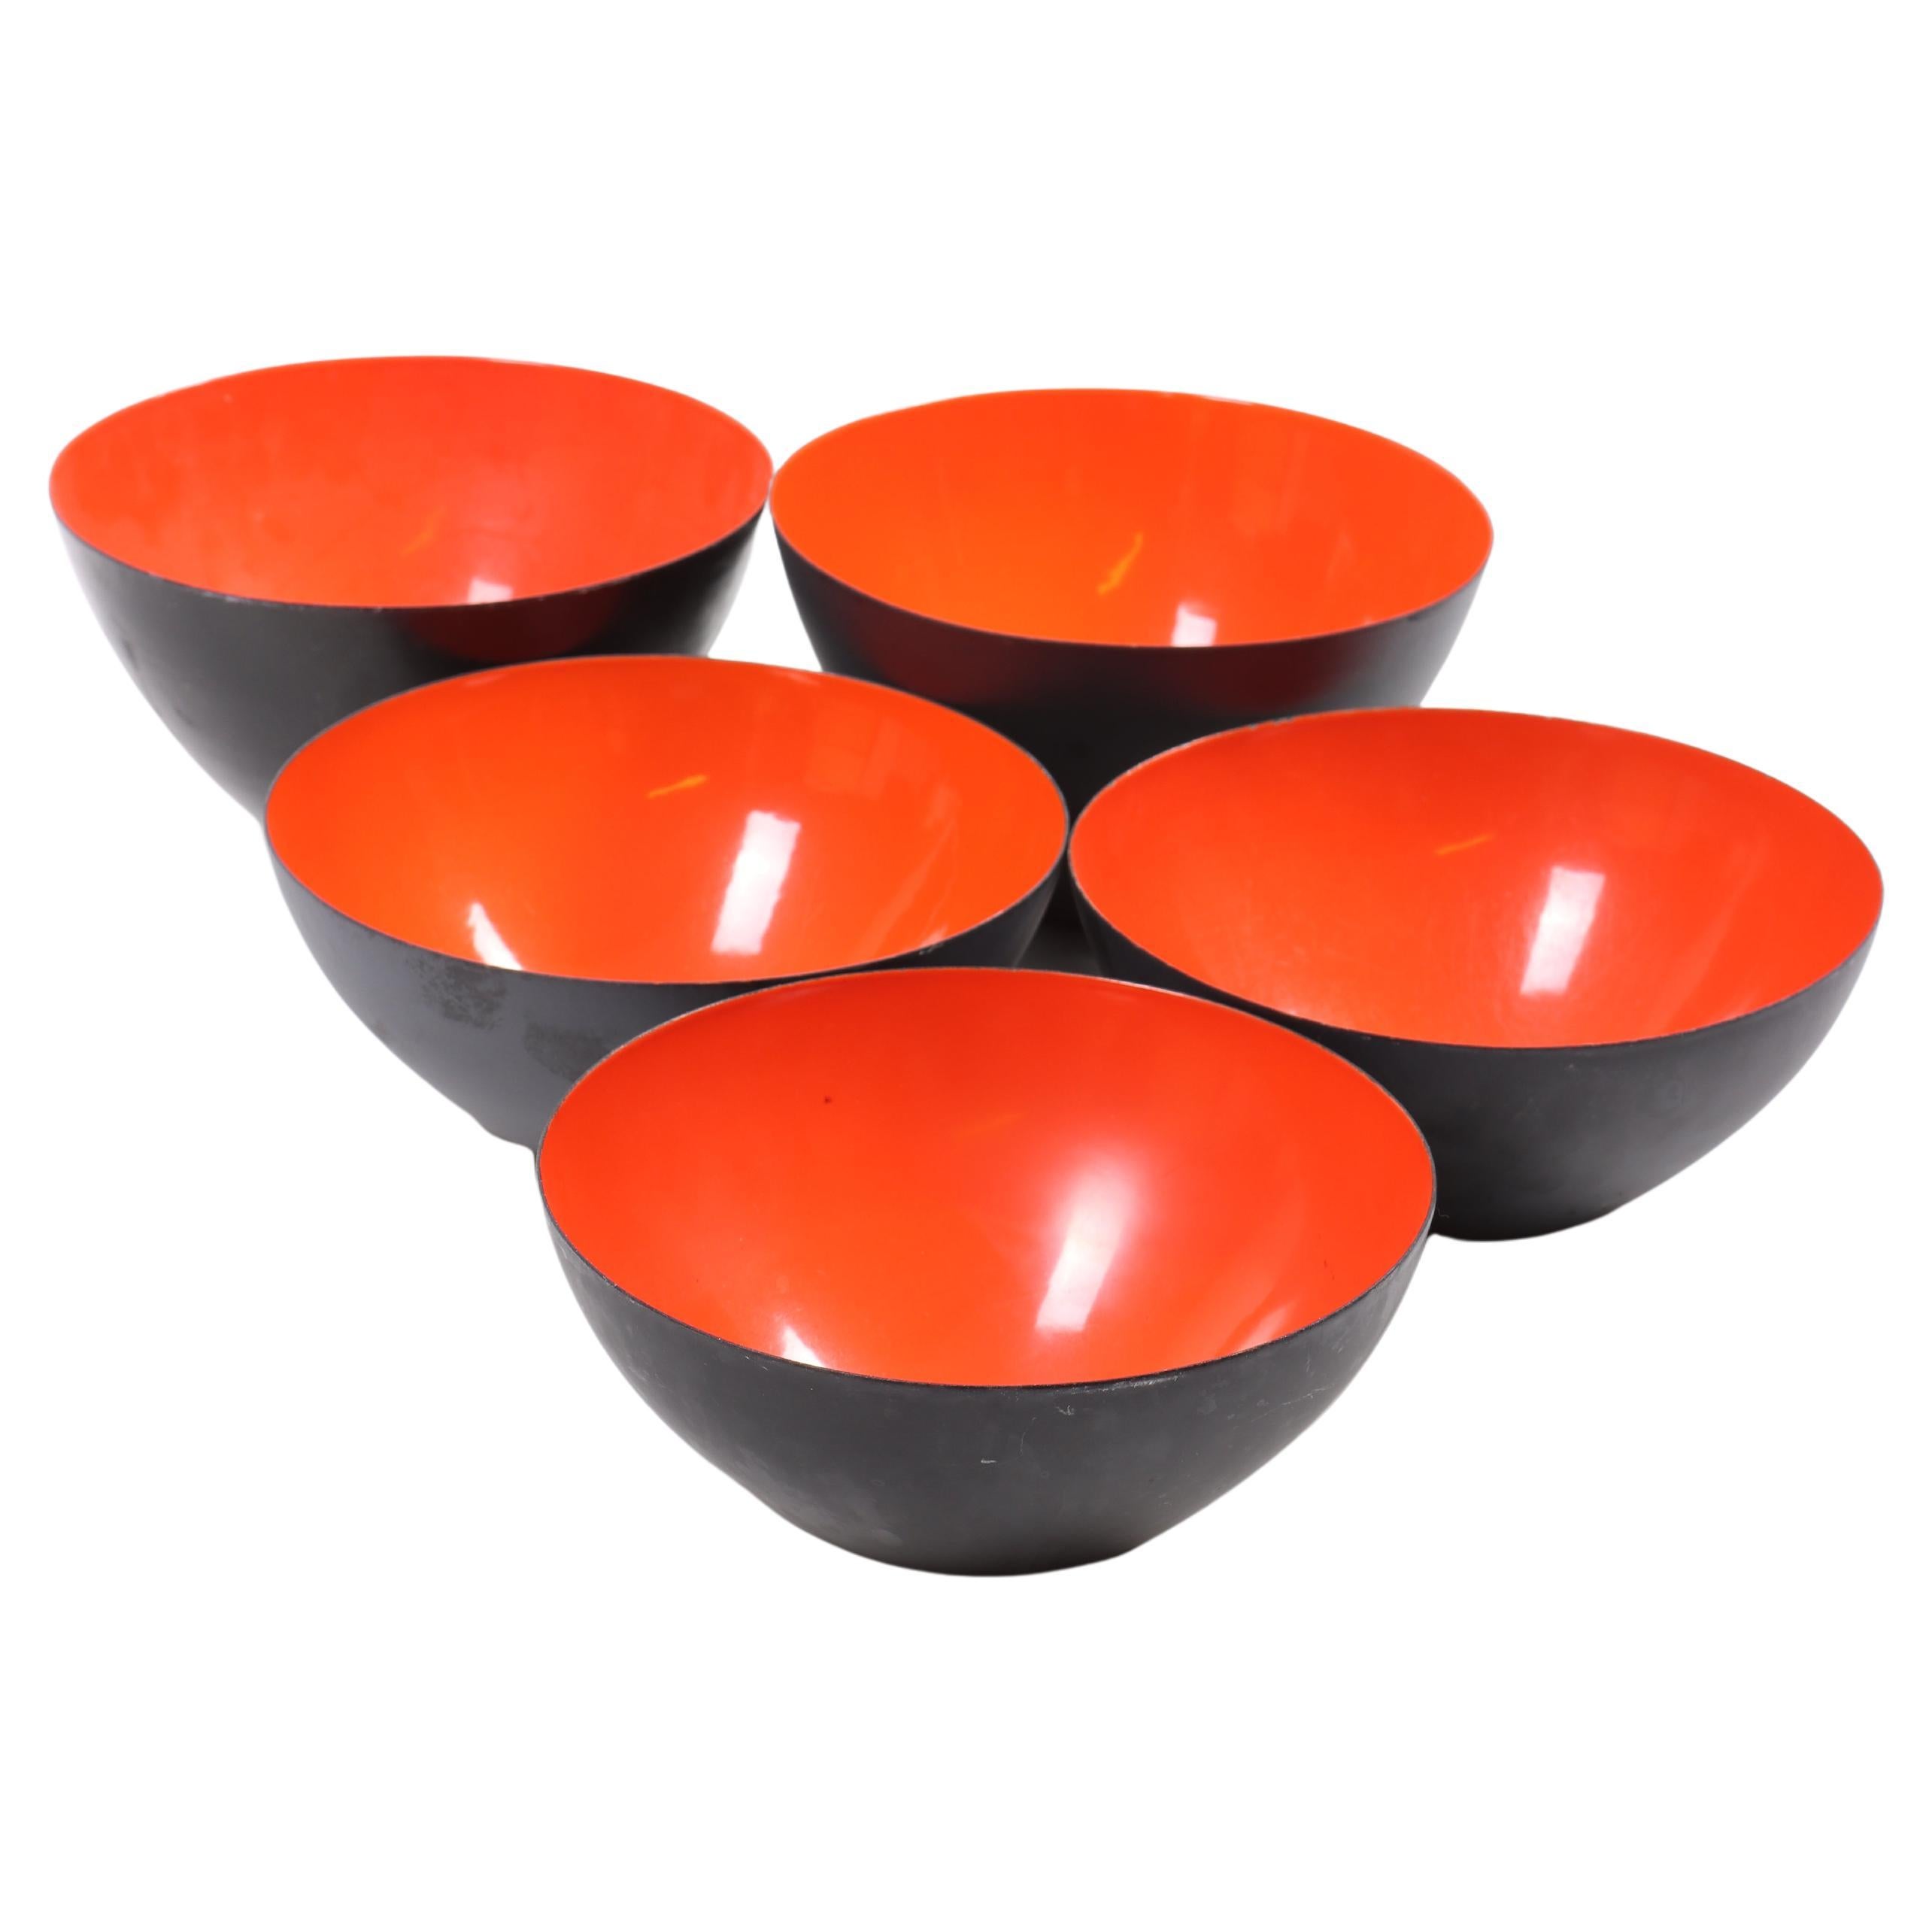 Collection of Five Krenit Bowls by Herbert Krenchel, Made in Denmark, 1950s For Sale